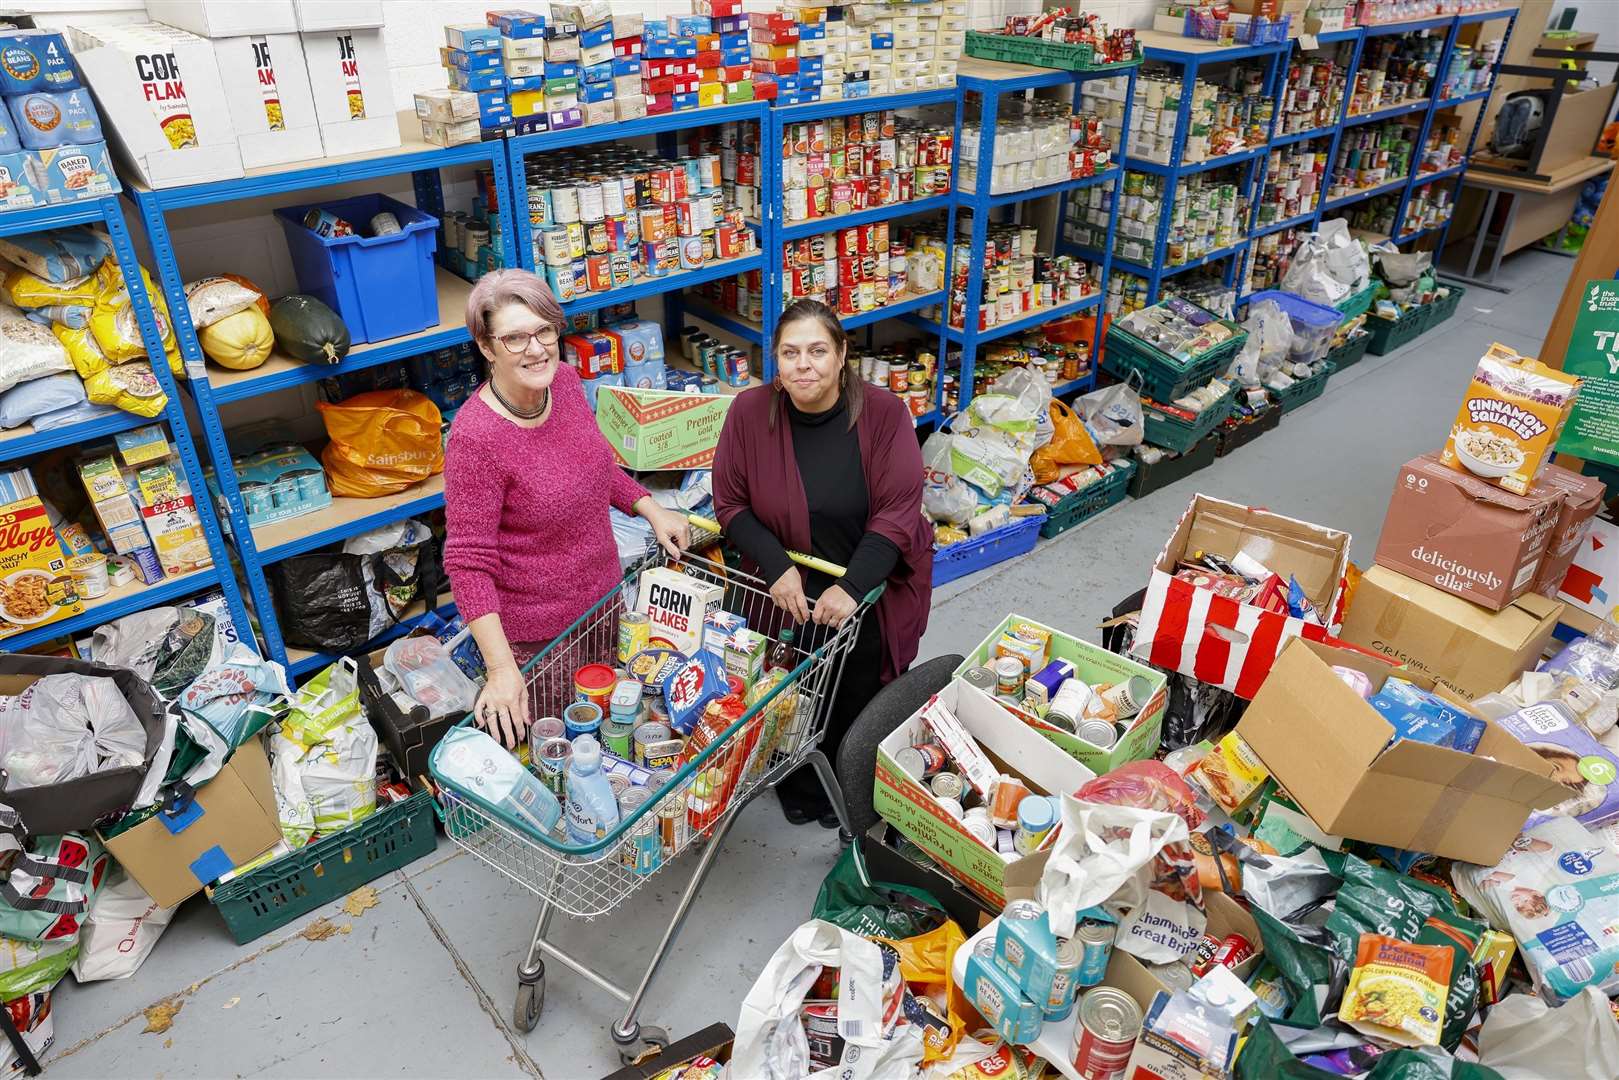 Esther Hurwood, Project Manager at Swale Foodbank, and a volunteer